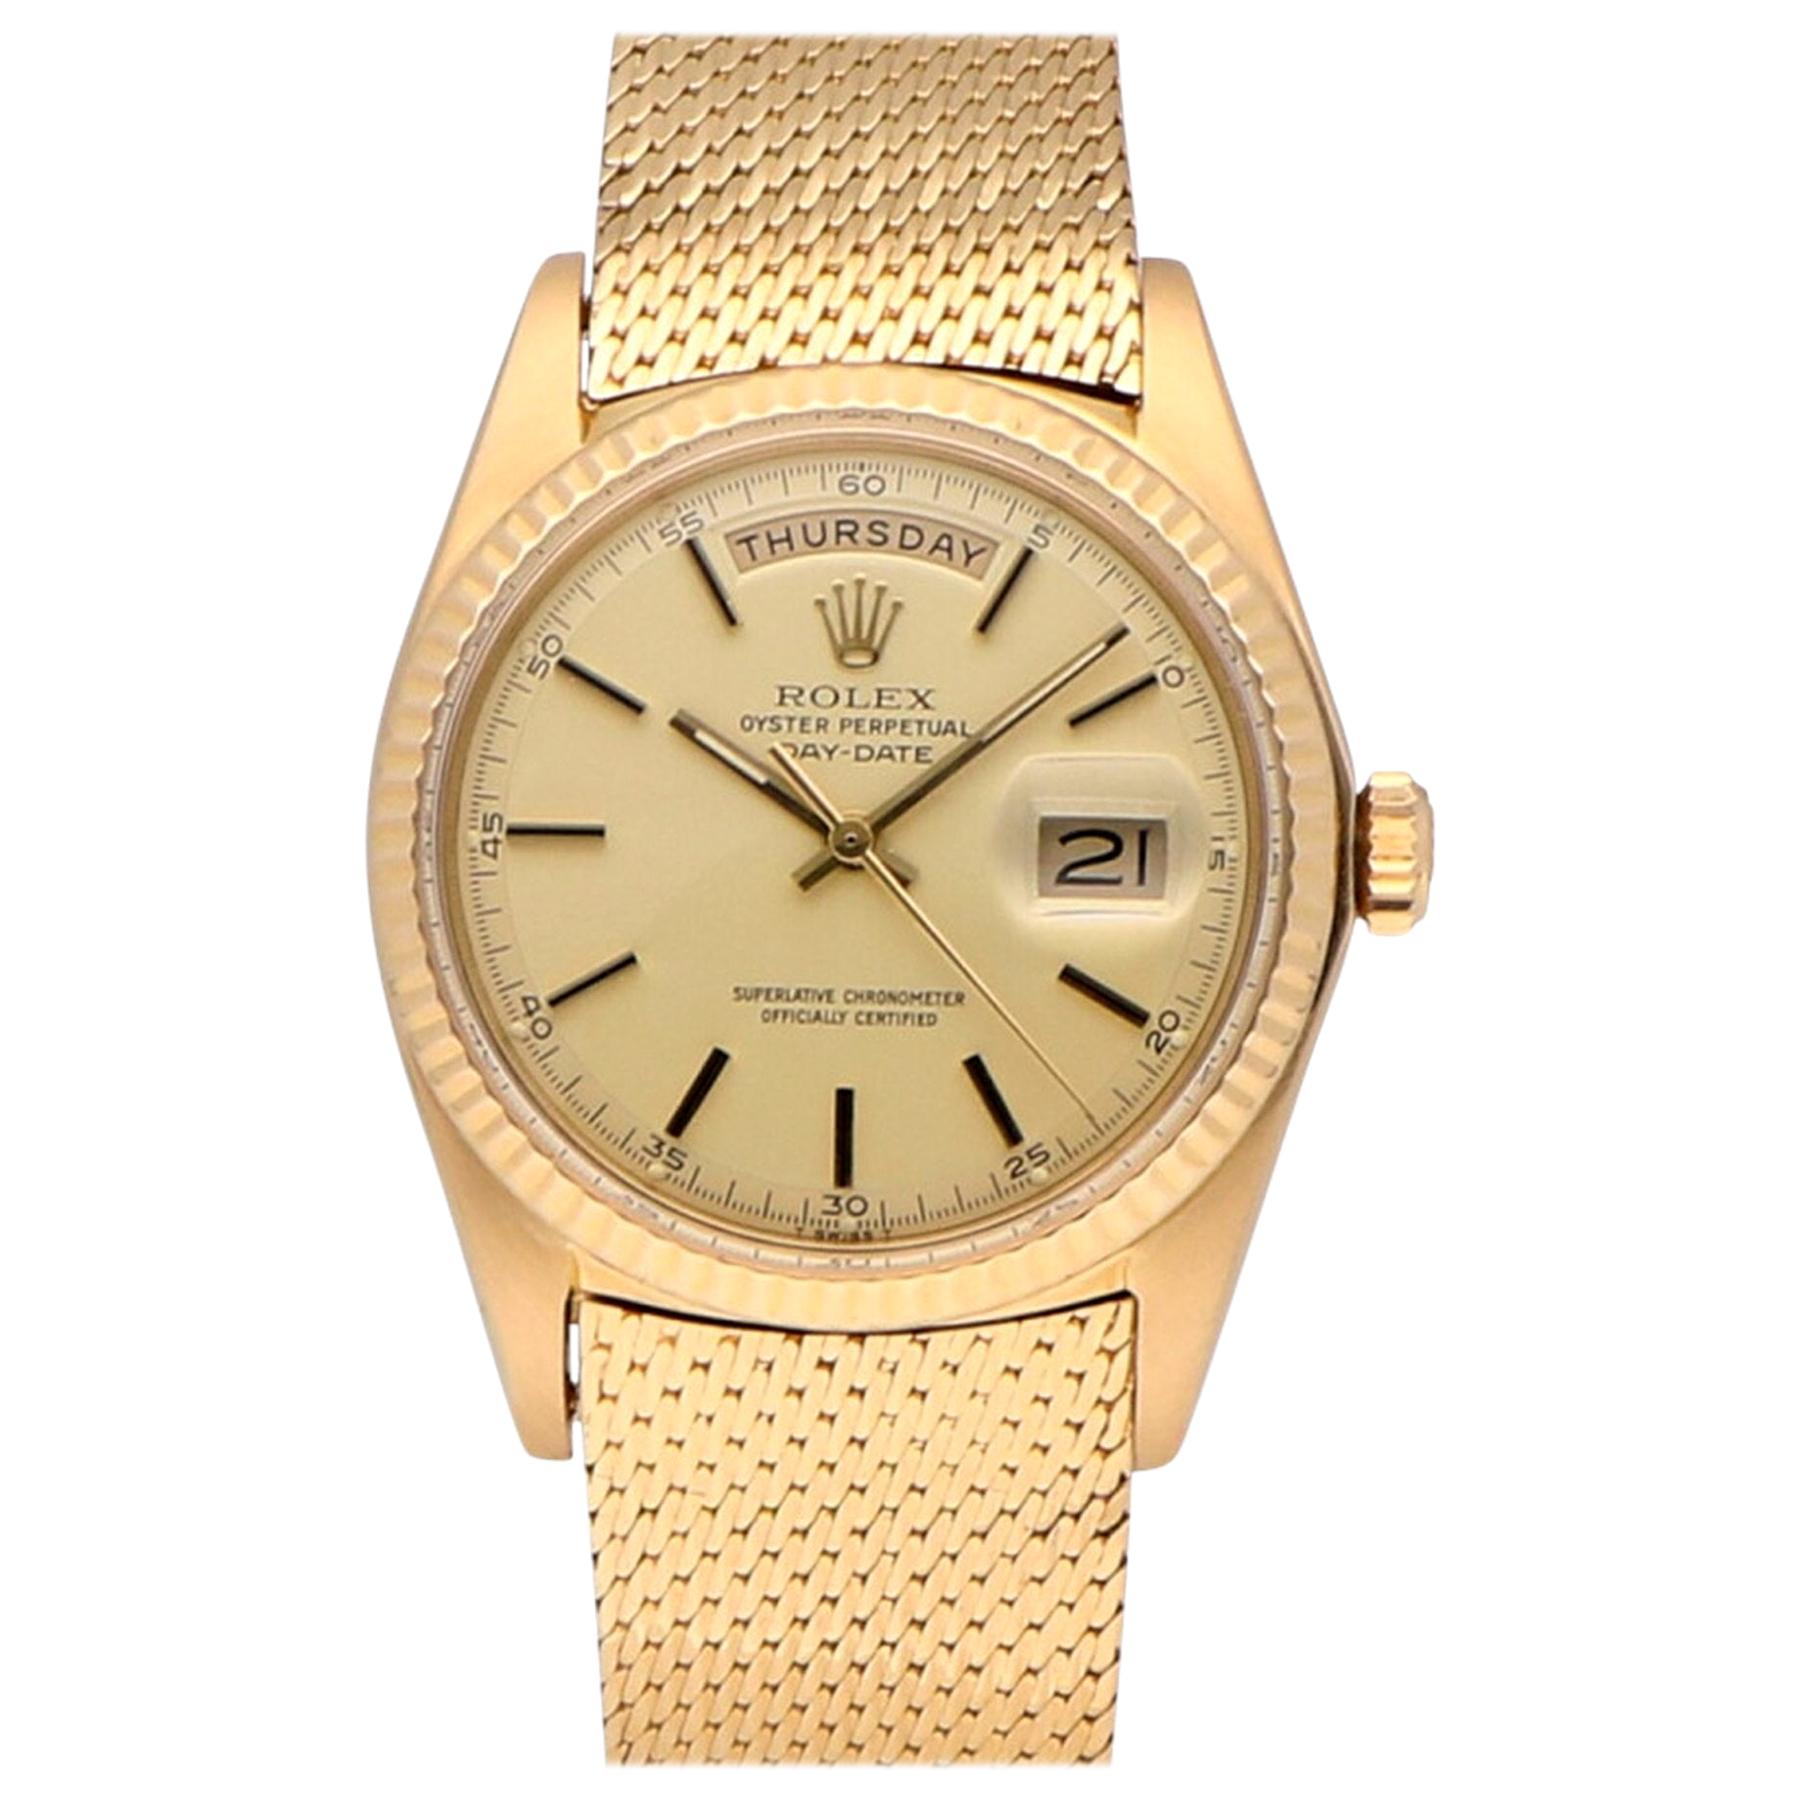 Pre-Owned Rolex Day-Date 18 Karat Yellow Gold 1803 Watch